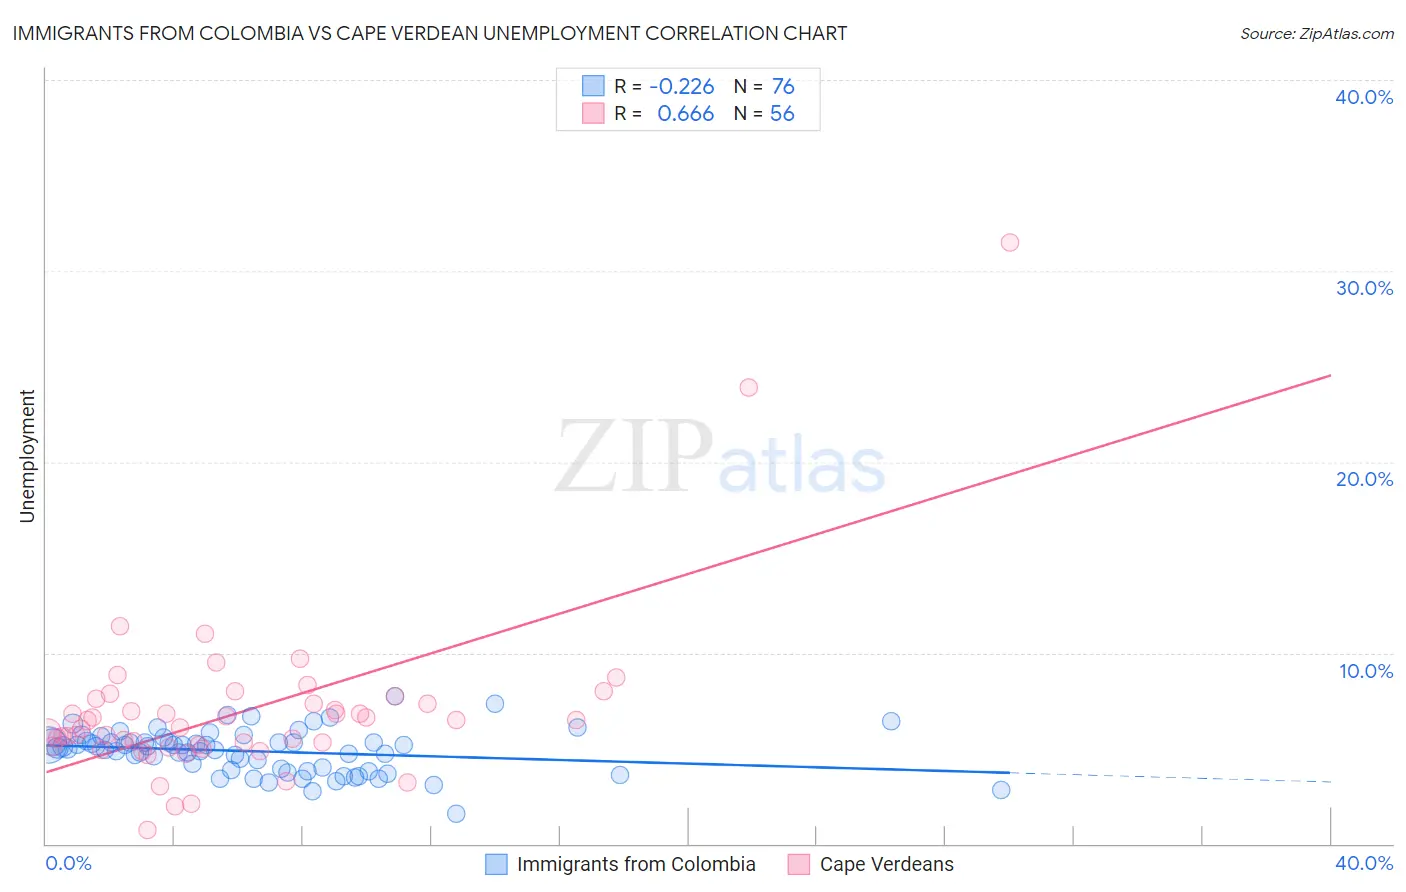 Immigrants from Colombia vs Cape Verdean Unemployment